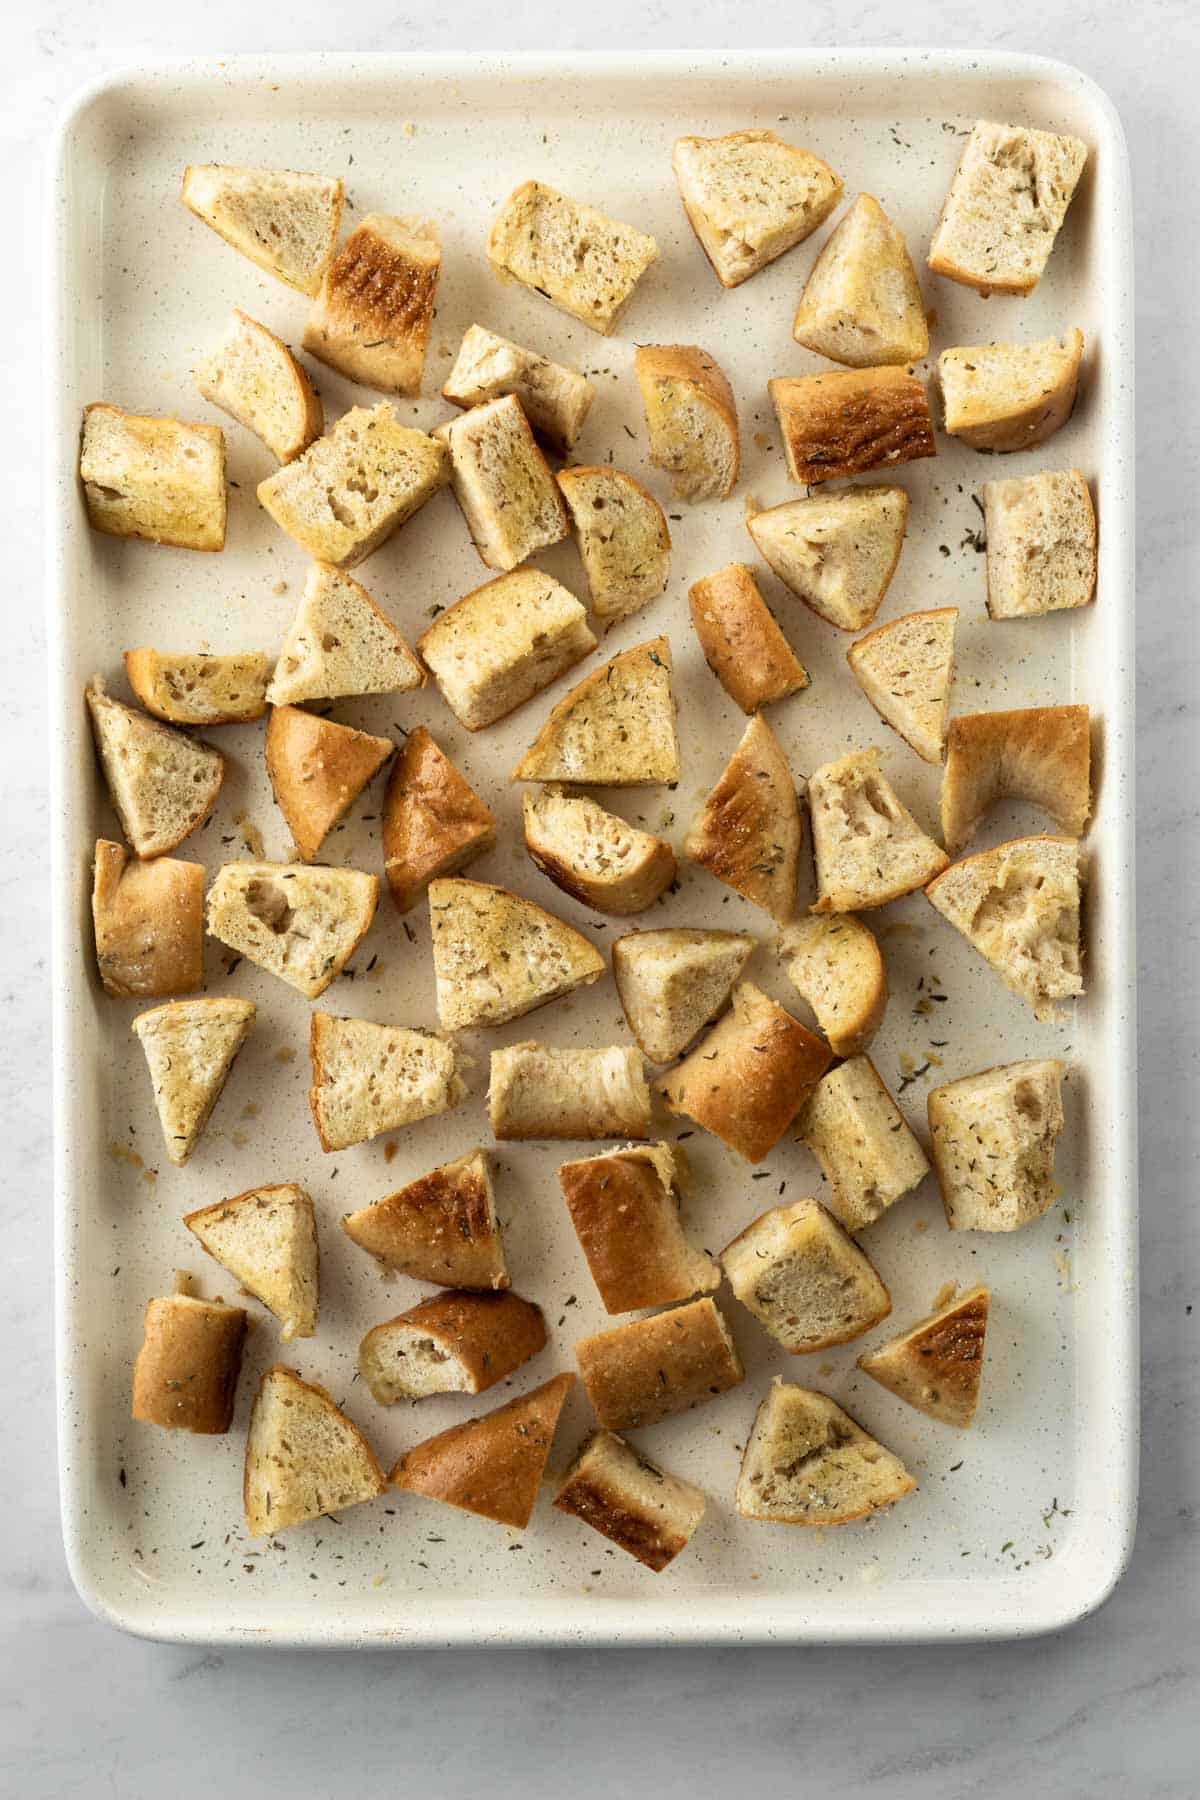 stale bread on a baking sheet drizzled with olive oil and seasoned with herbs and salt.